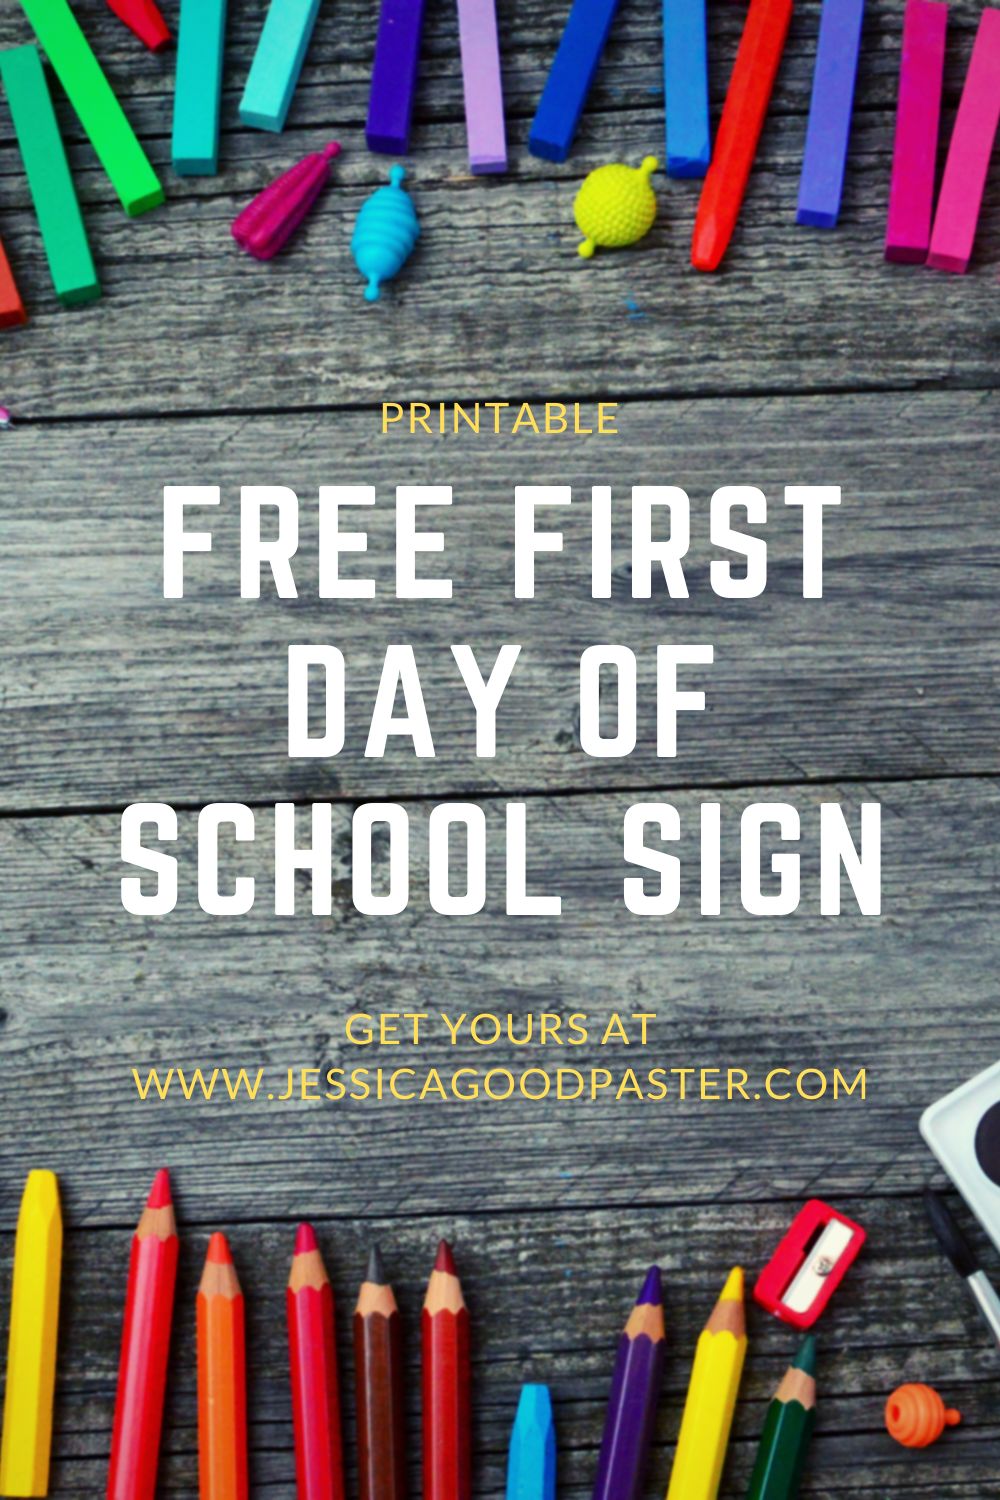 5 Simple Back-to-School Hacks | Download your FREE printable first day of school sign! Plus, these 5 back-to-school ideas will save you time, money, and headache as you prepare for the new school year. #backtoschool #freeprintable #school #schoolroutine #schoolhacks #schoolsupplies  #firstdayofschool